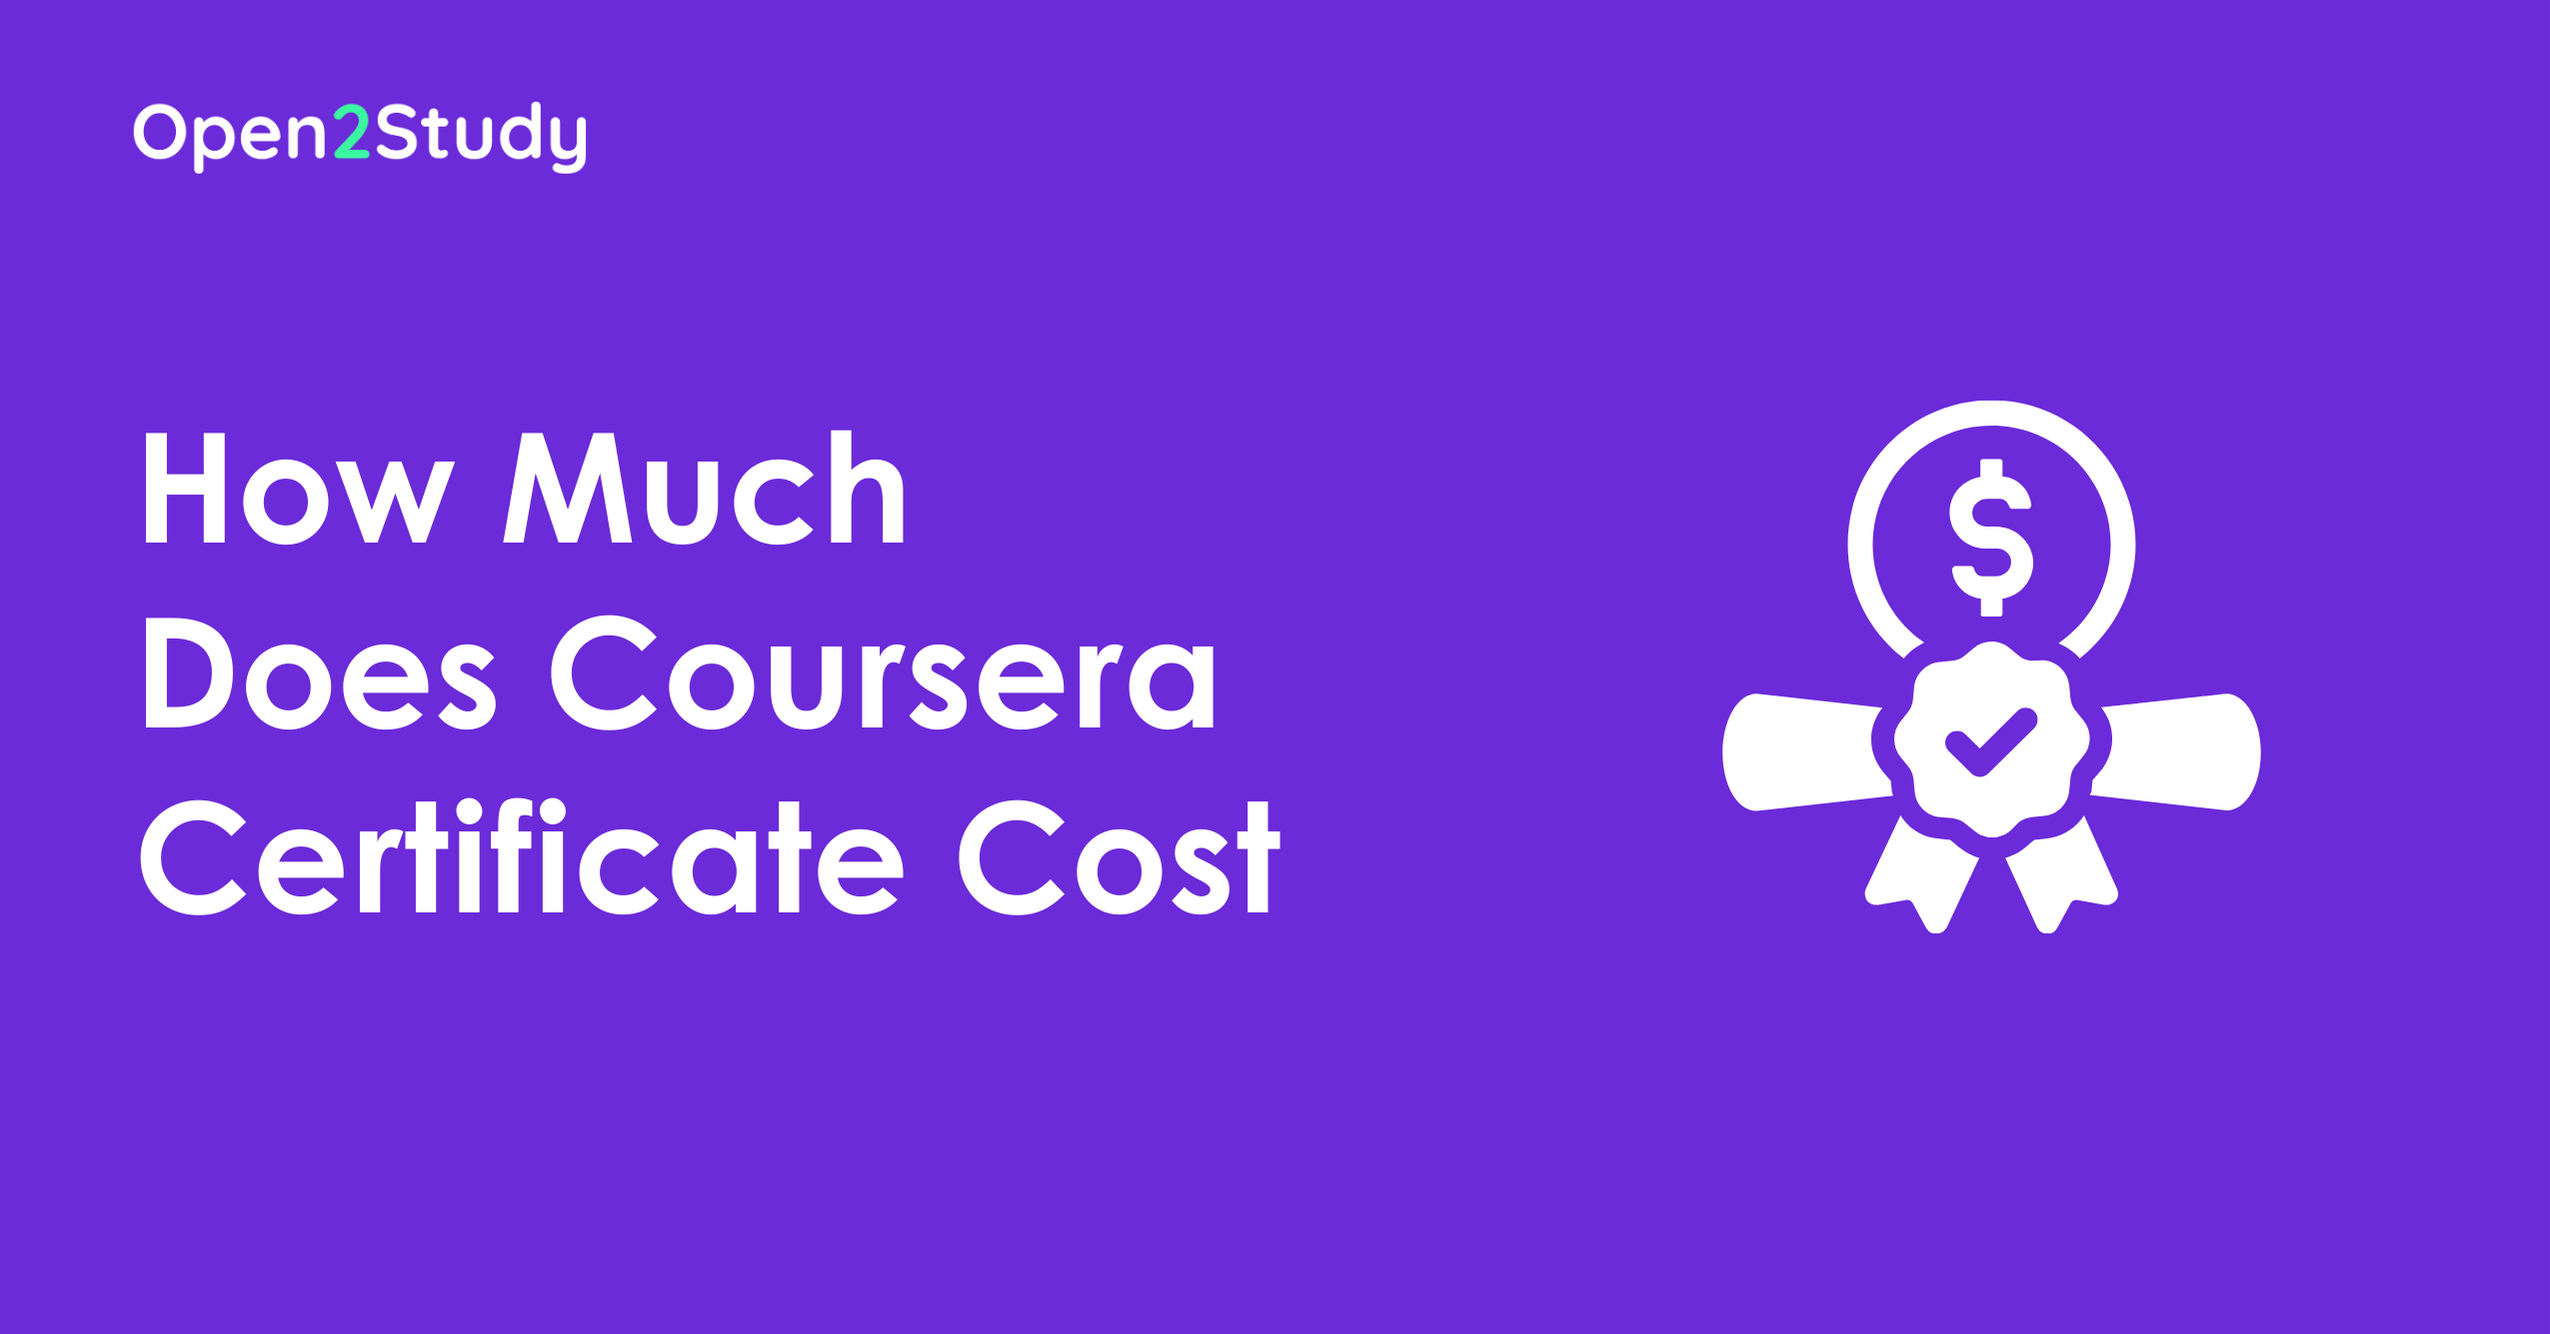 How Much Does Coursera Certificate Cost